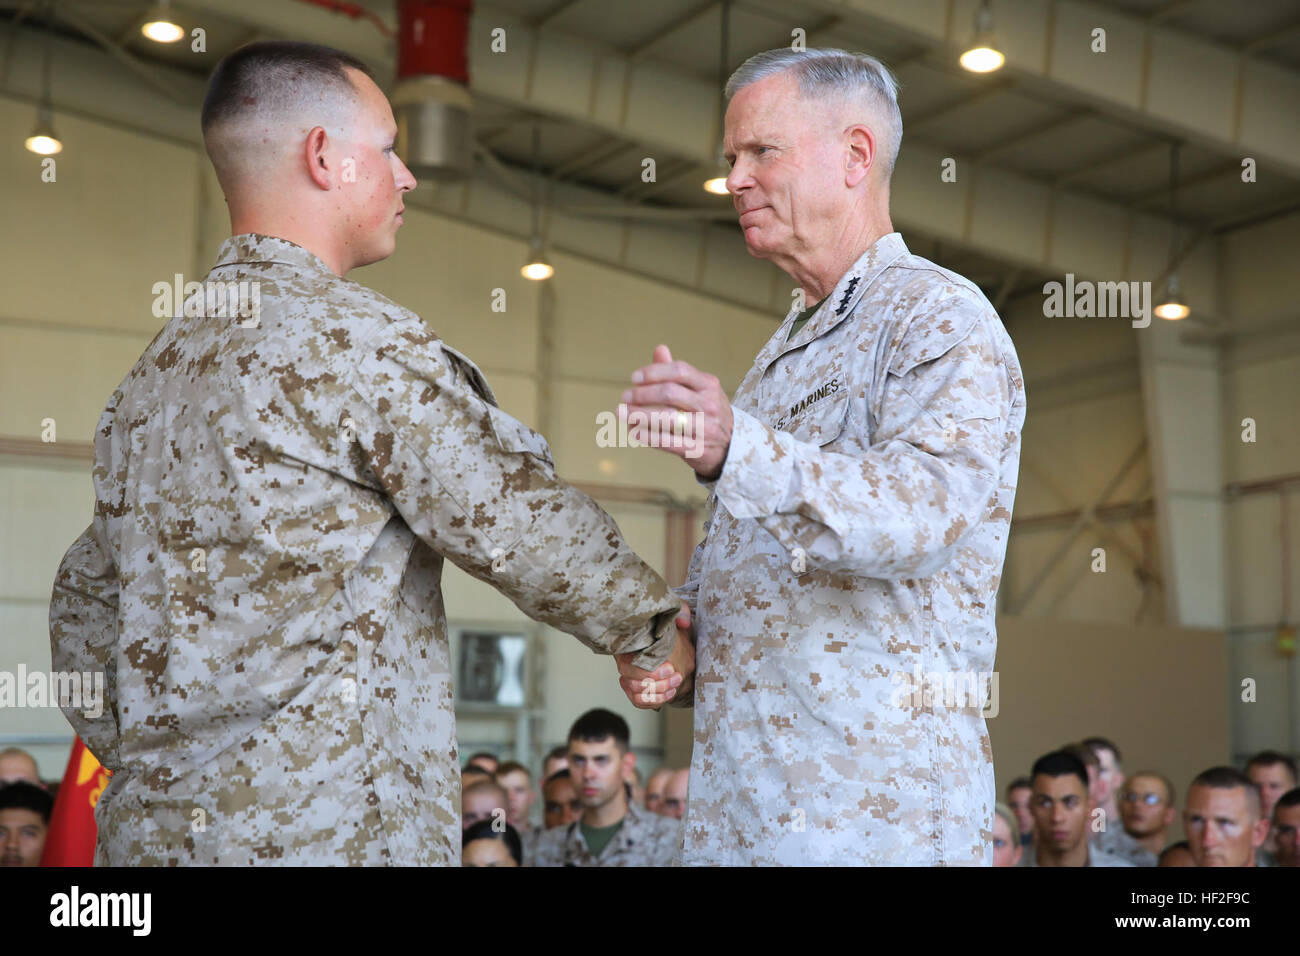 U.S. Marine Corps Gen. James F. Amos, commandant of the Marine Corps, congratulates Cpl. Matthew Padilla, an airframe mechanic assigned to Marine Aviation Logistics Group 17 (MALS-17), Marine Aircraft Group – Afghanistan (MAG-A), after promoting him meritoriously during a visit to forward deployed forces aboard Camp Bastion, Helmand province, Afghanistan, Sept 6, 2014. The visit marks the final time Amos and Sgt. Maj. Micheal P. Barrett, sergeant major of the Marine Corps, will meet with Marines and sailors deployed to Helmand in support of Operation Enduring Freedom. (Official U.S. Marine Cor Stock Photo